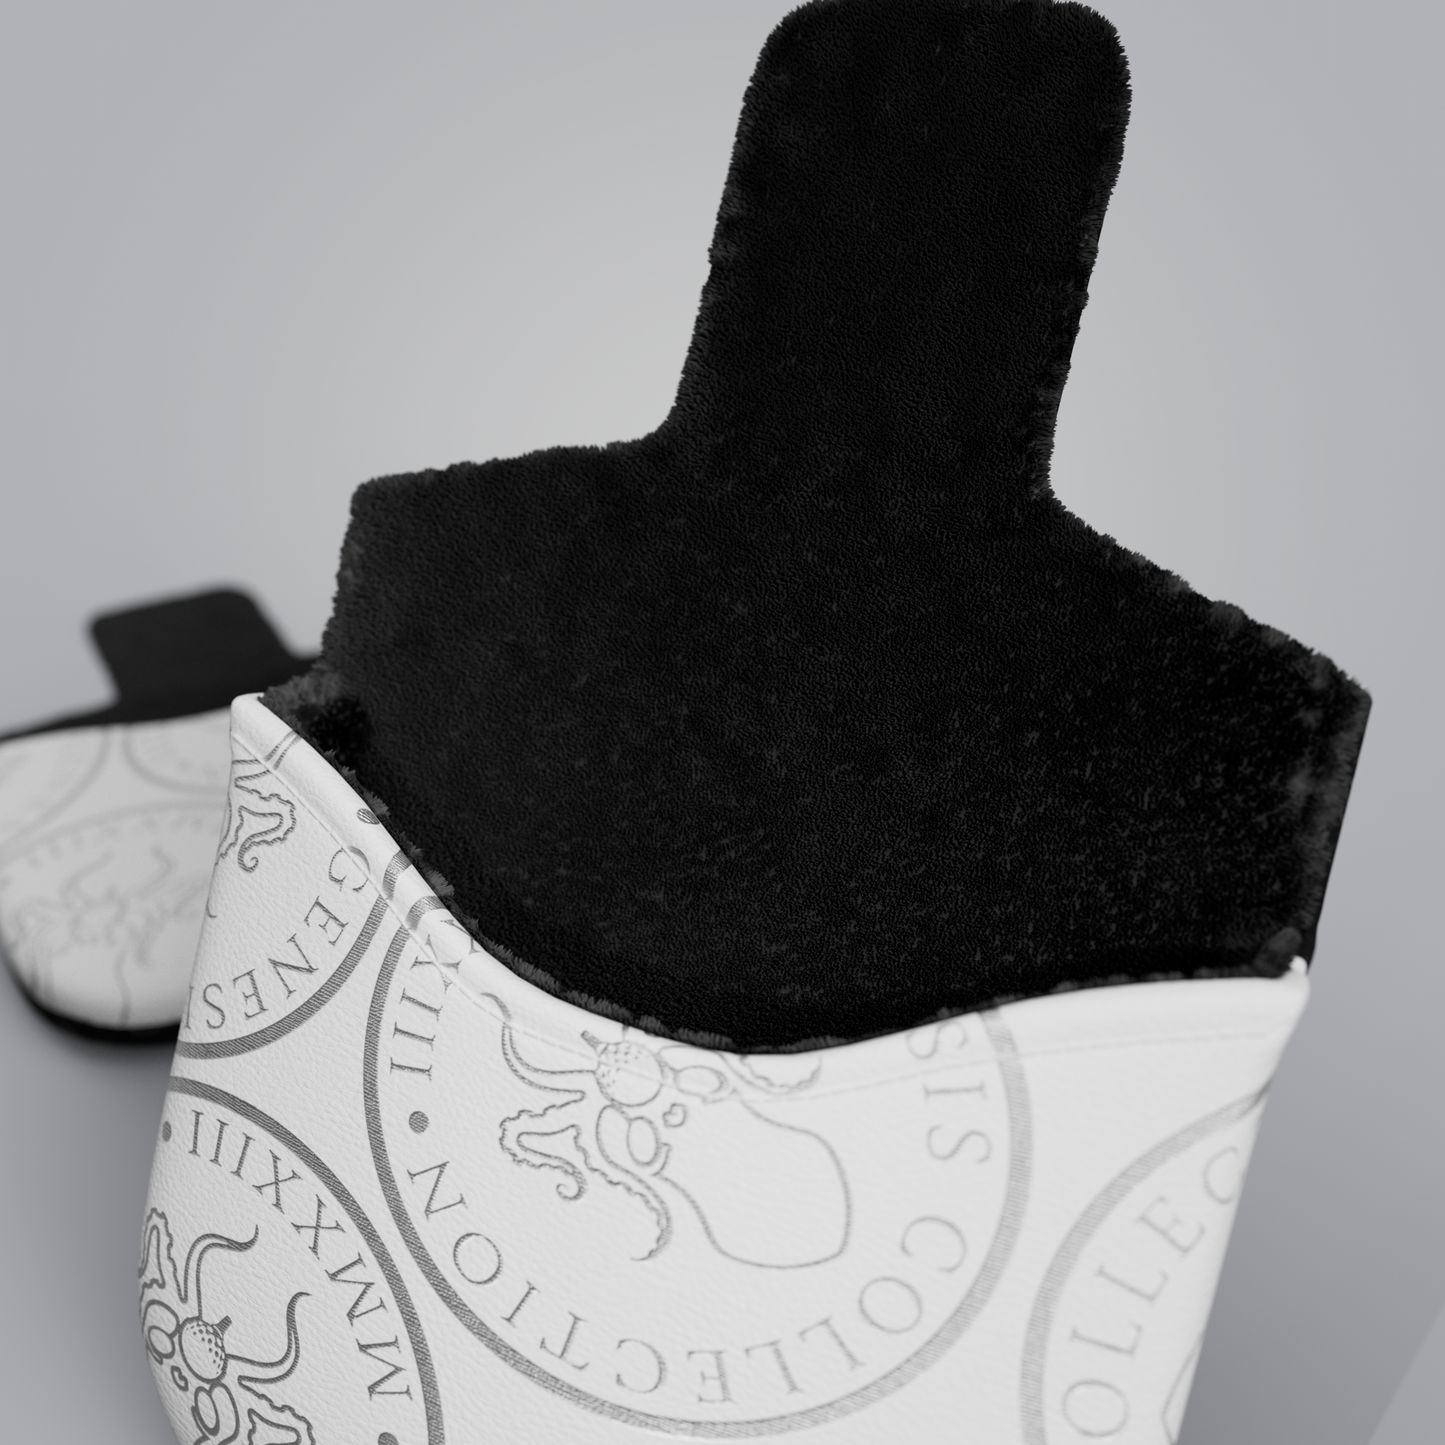 X-Ray Mallet Headcover